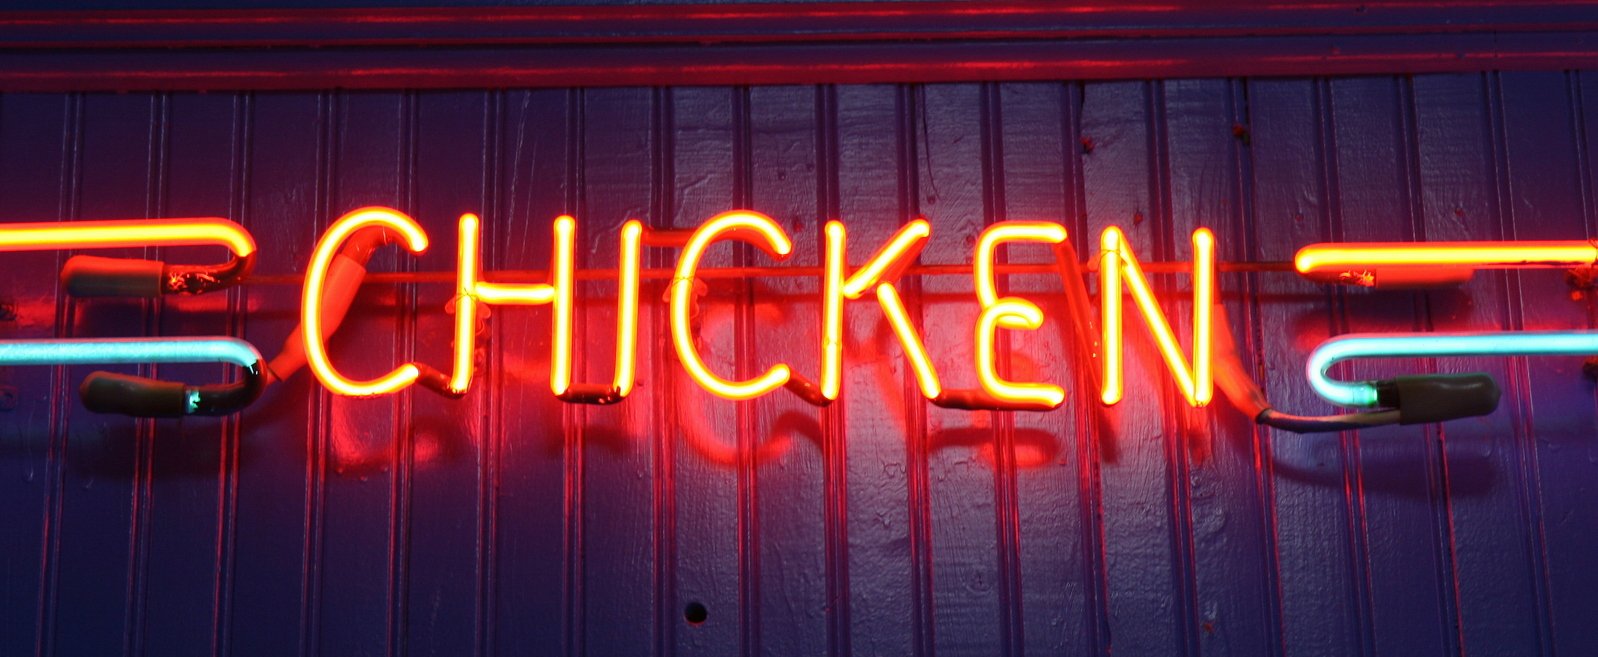 this neon sign says chicken street on the wall